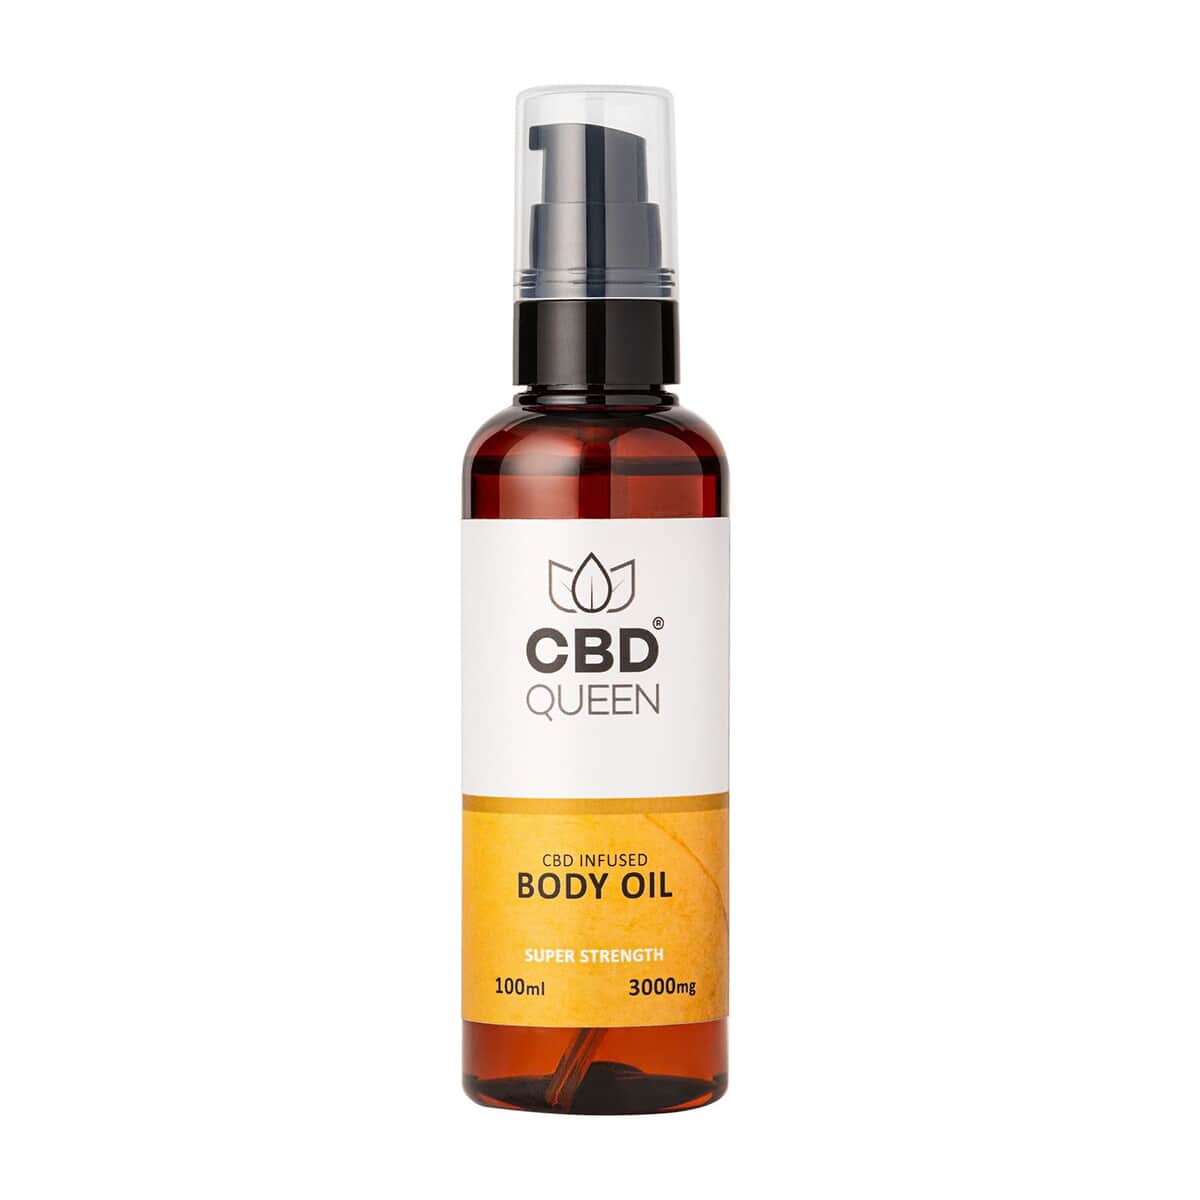 CBD Queen 100ml Body Oil - Super Strength 3000mg image number 0